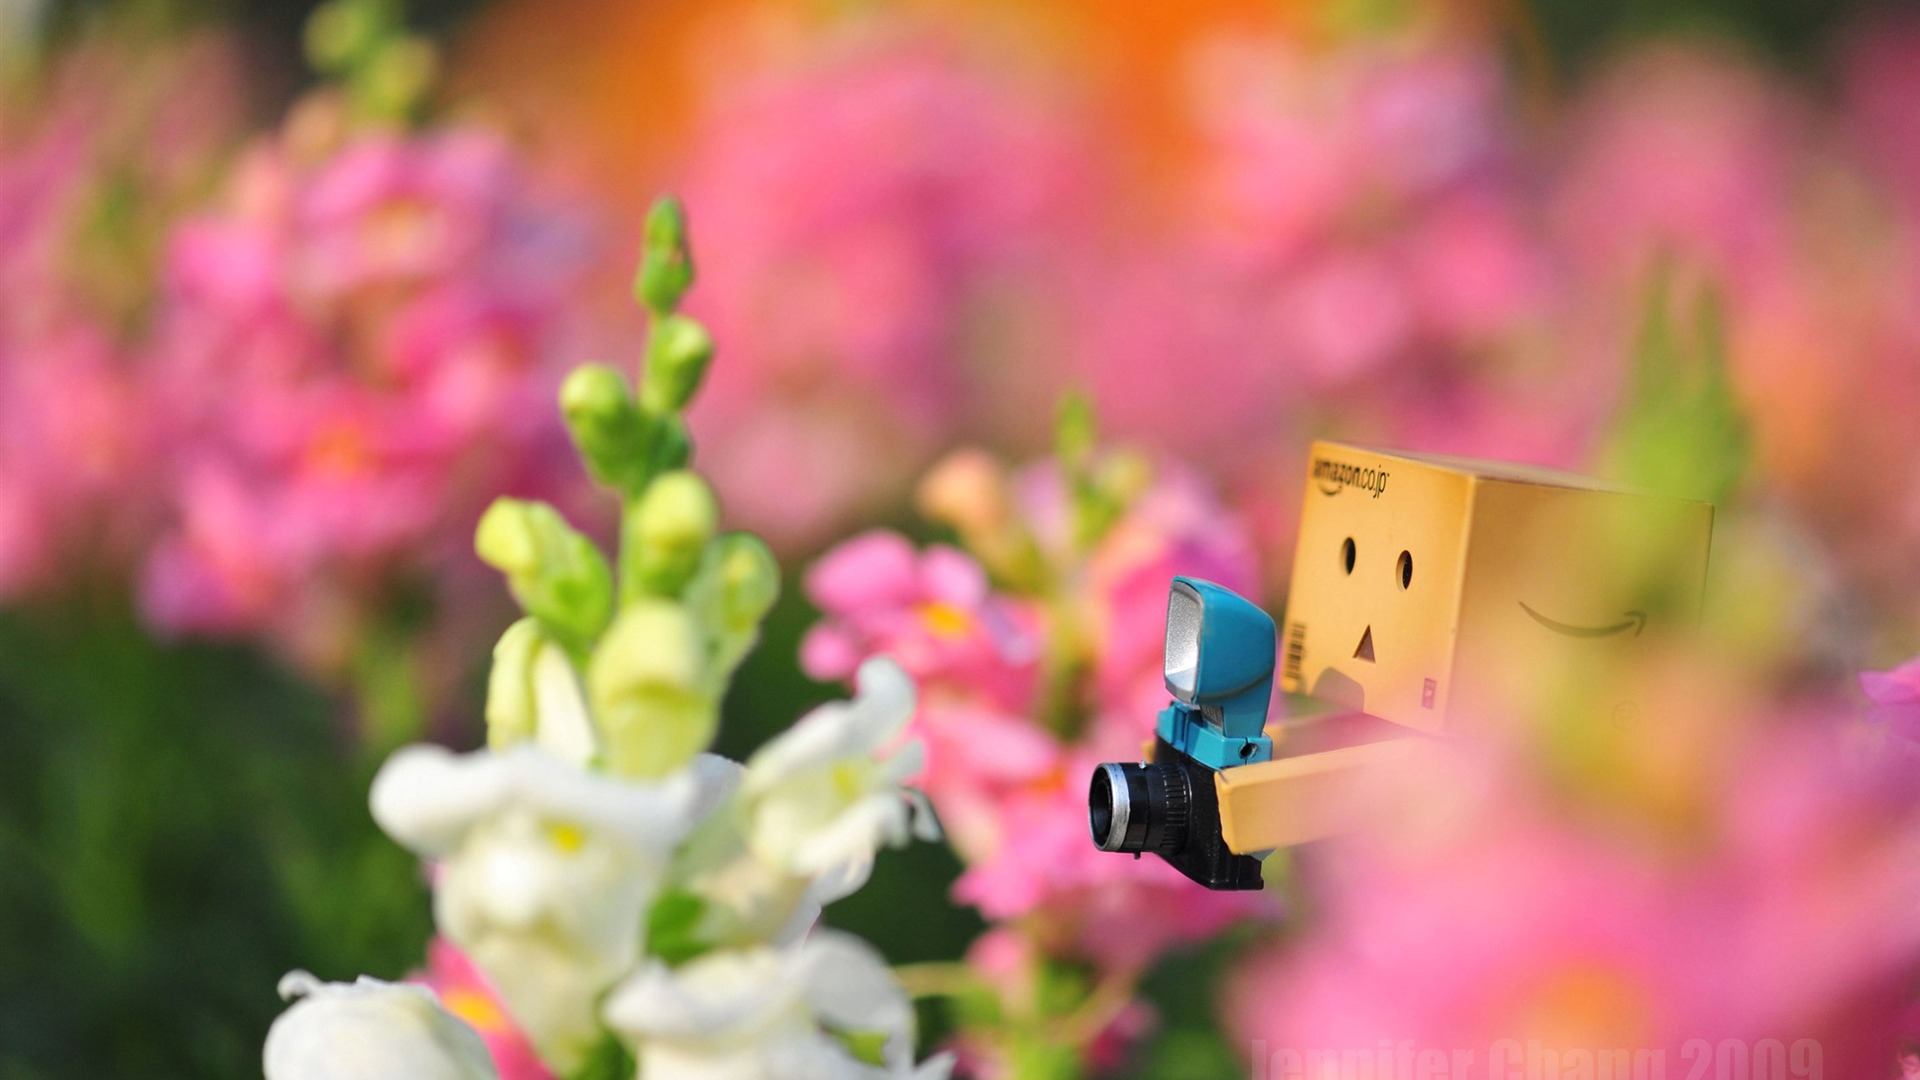 Cute Background Wallpaper Pc Danbo Is High Definition You